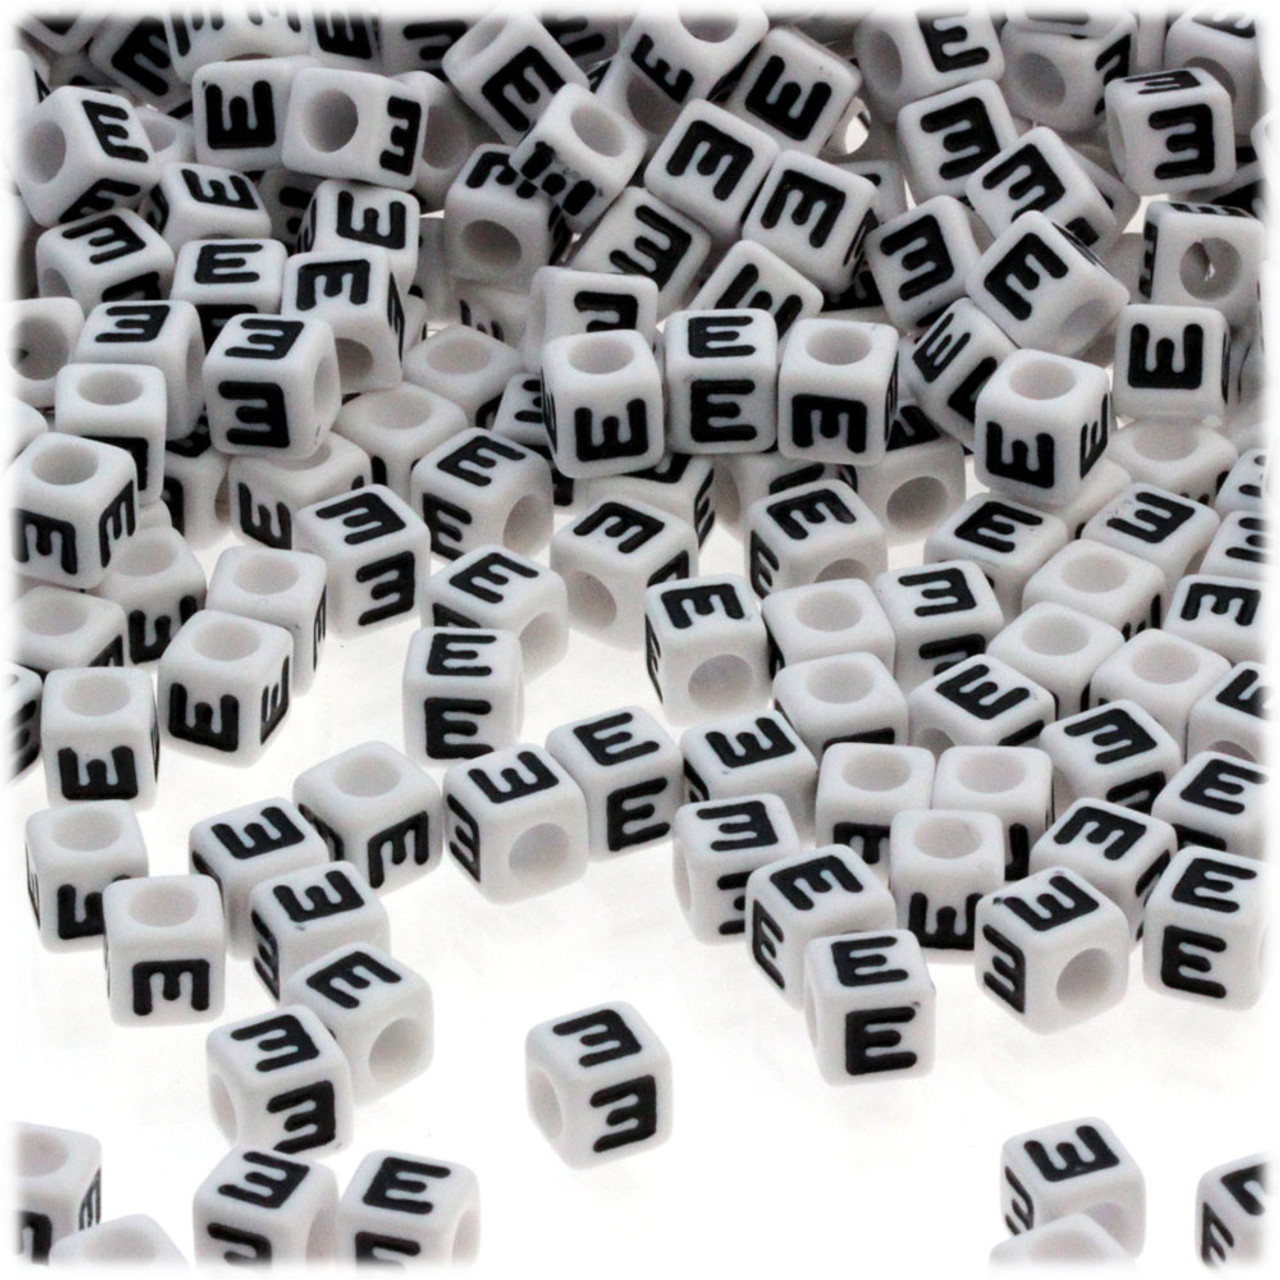 Colorful Alphabet Beads in Cube Shape